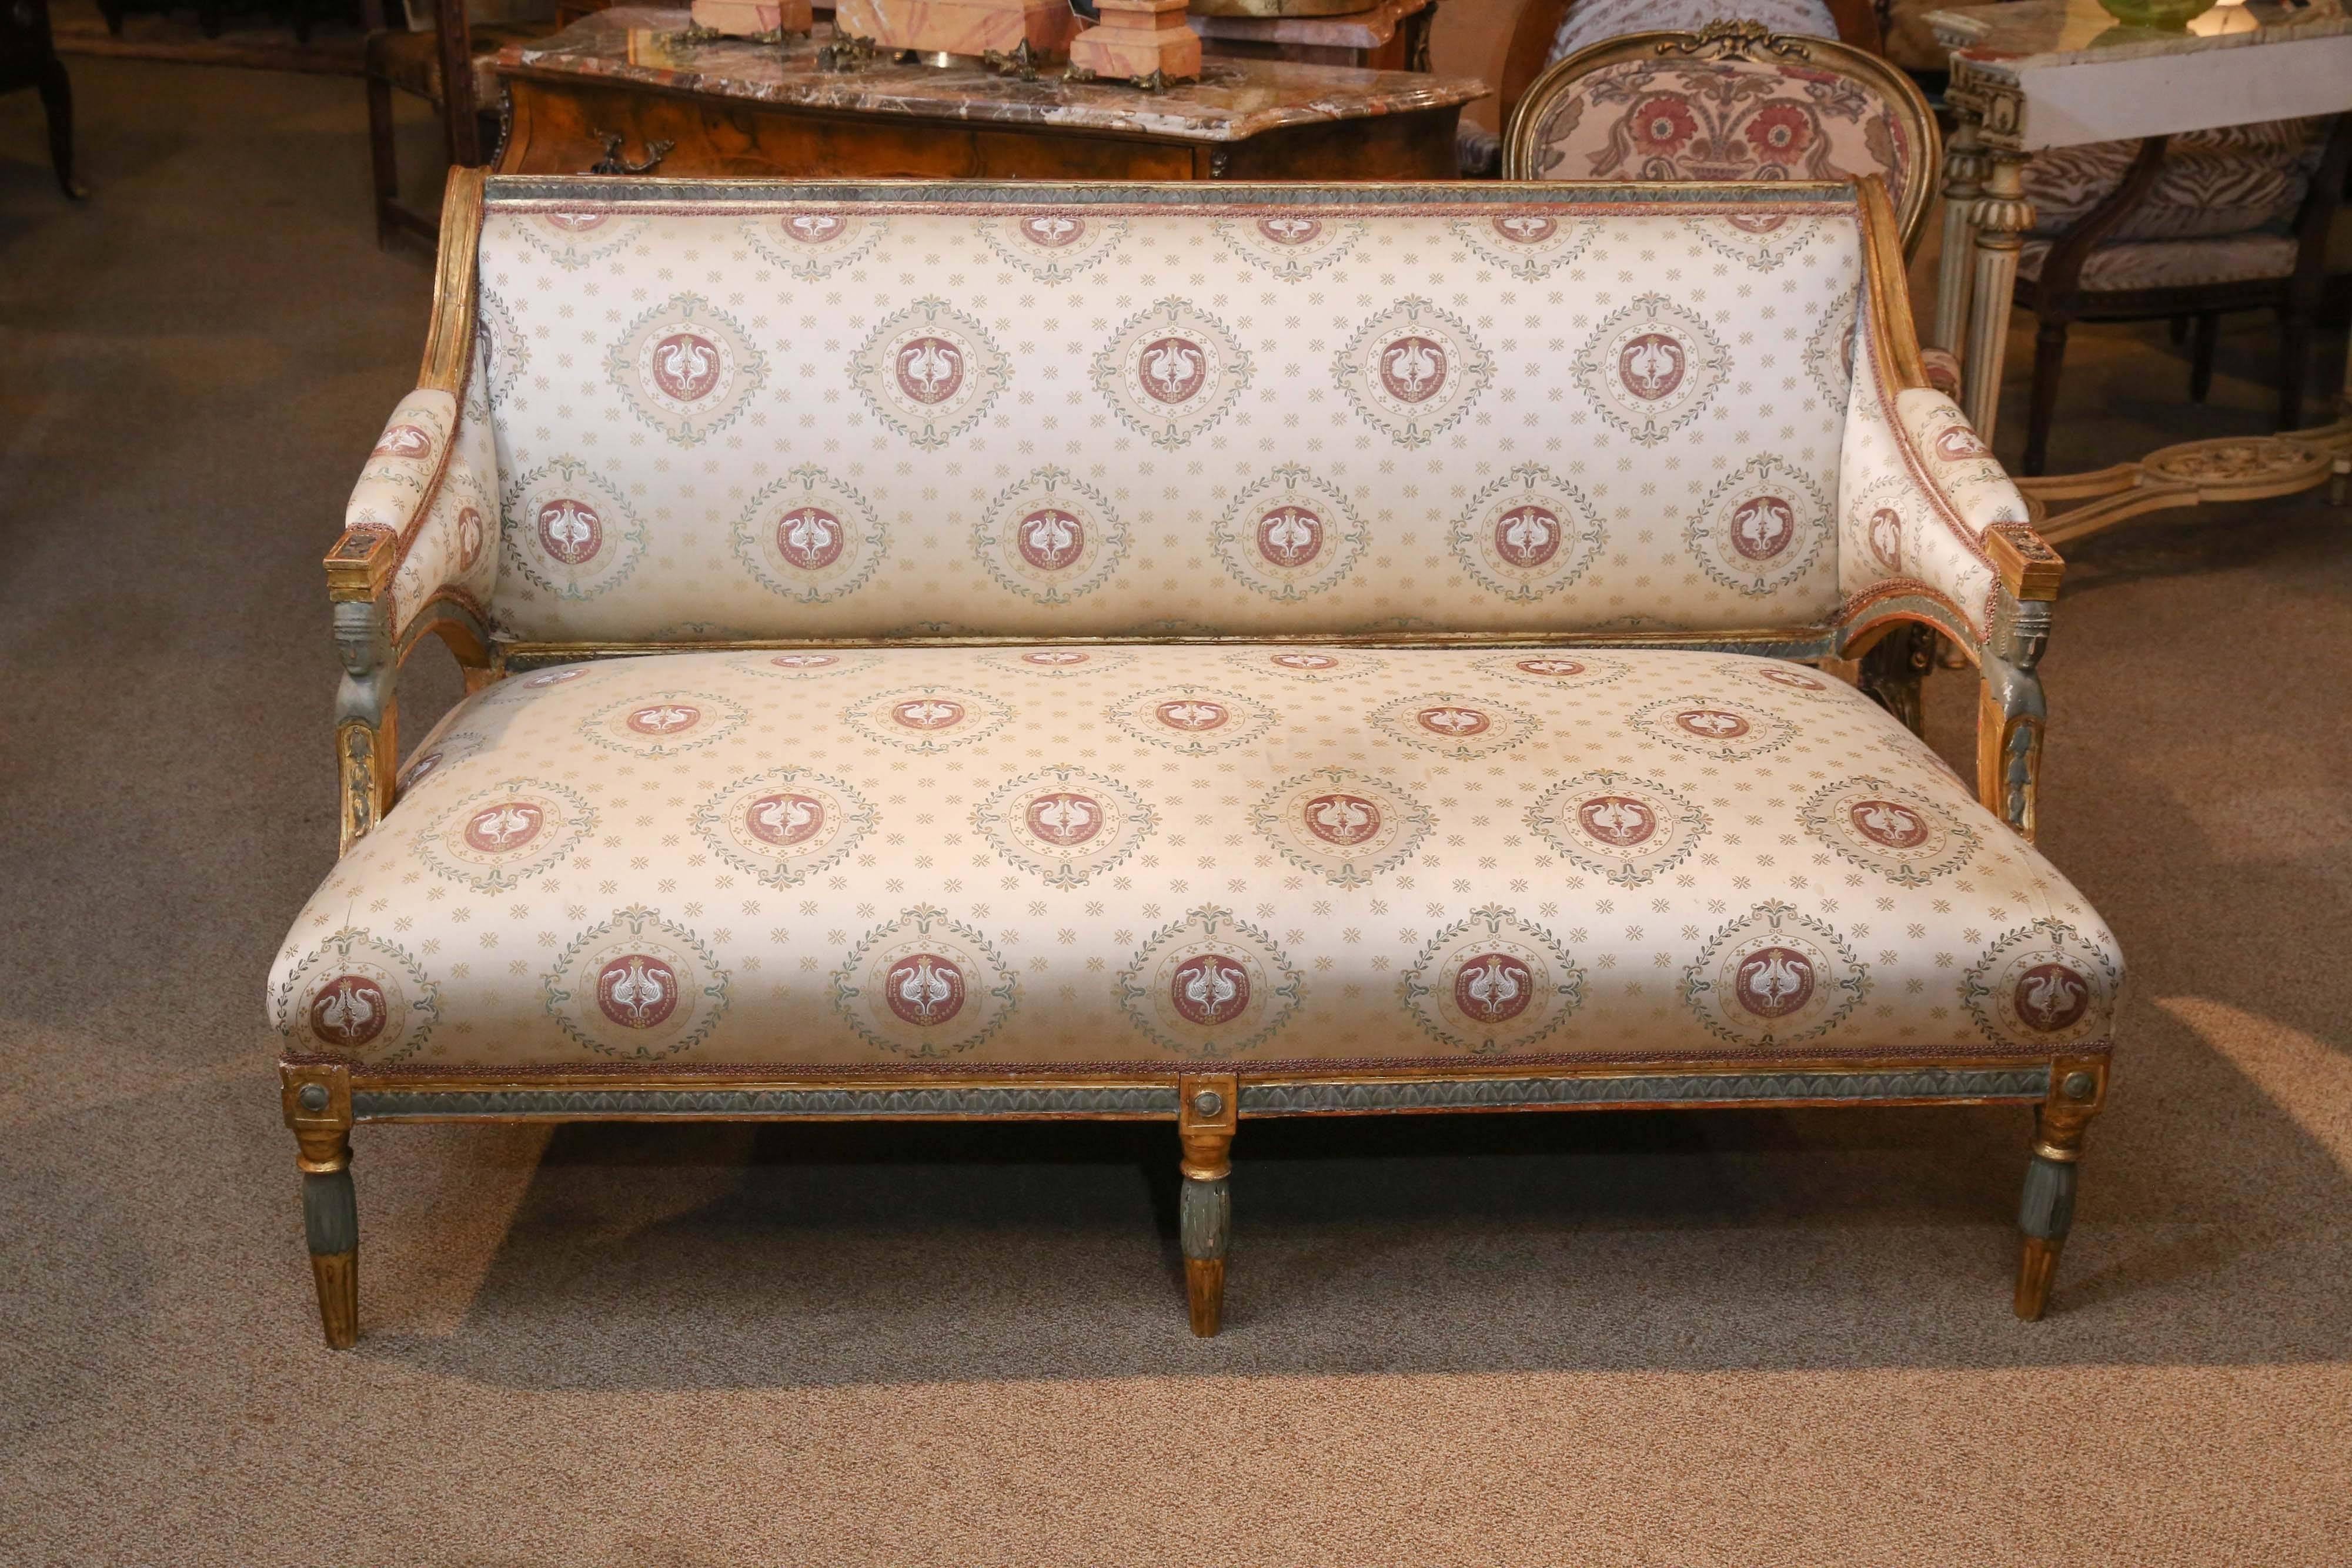 Exceptional French Empire settee pale celadon green paint and giltwood
frame, figural Egyptian heads carved on the arms. Reeded French
legs in paint and giltwood combination.
   